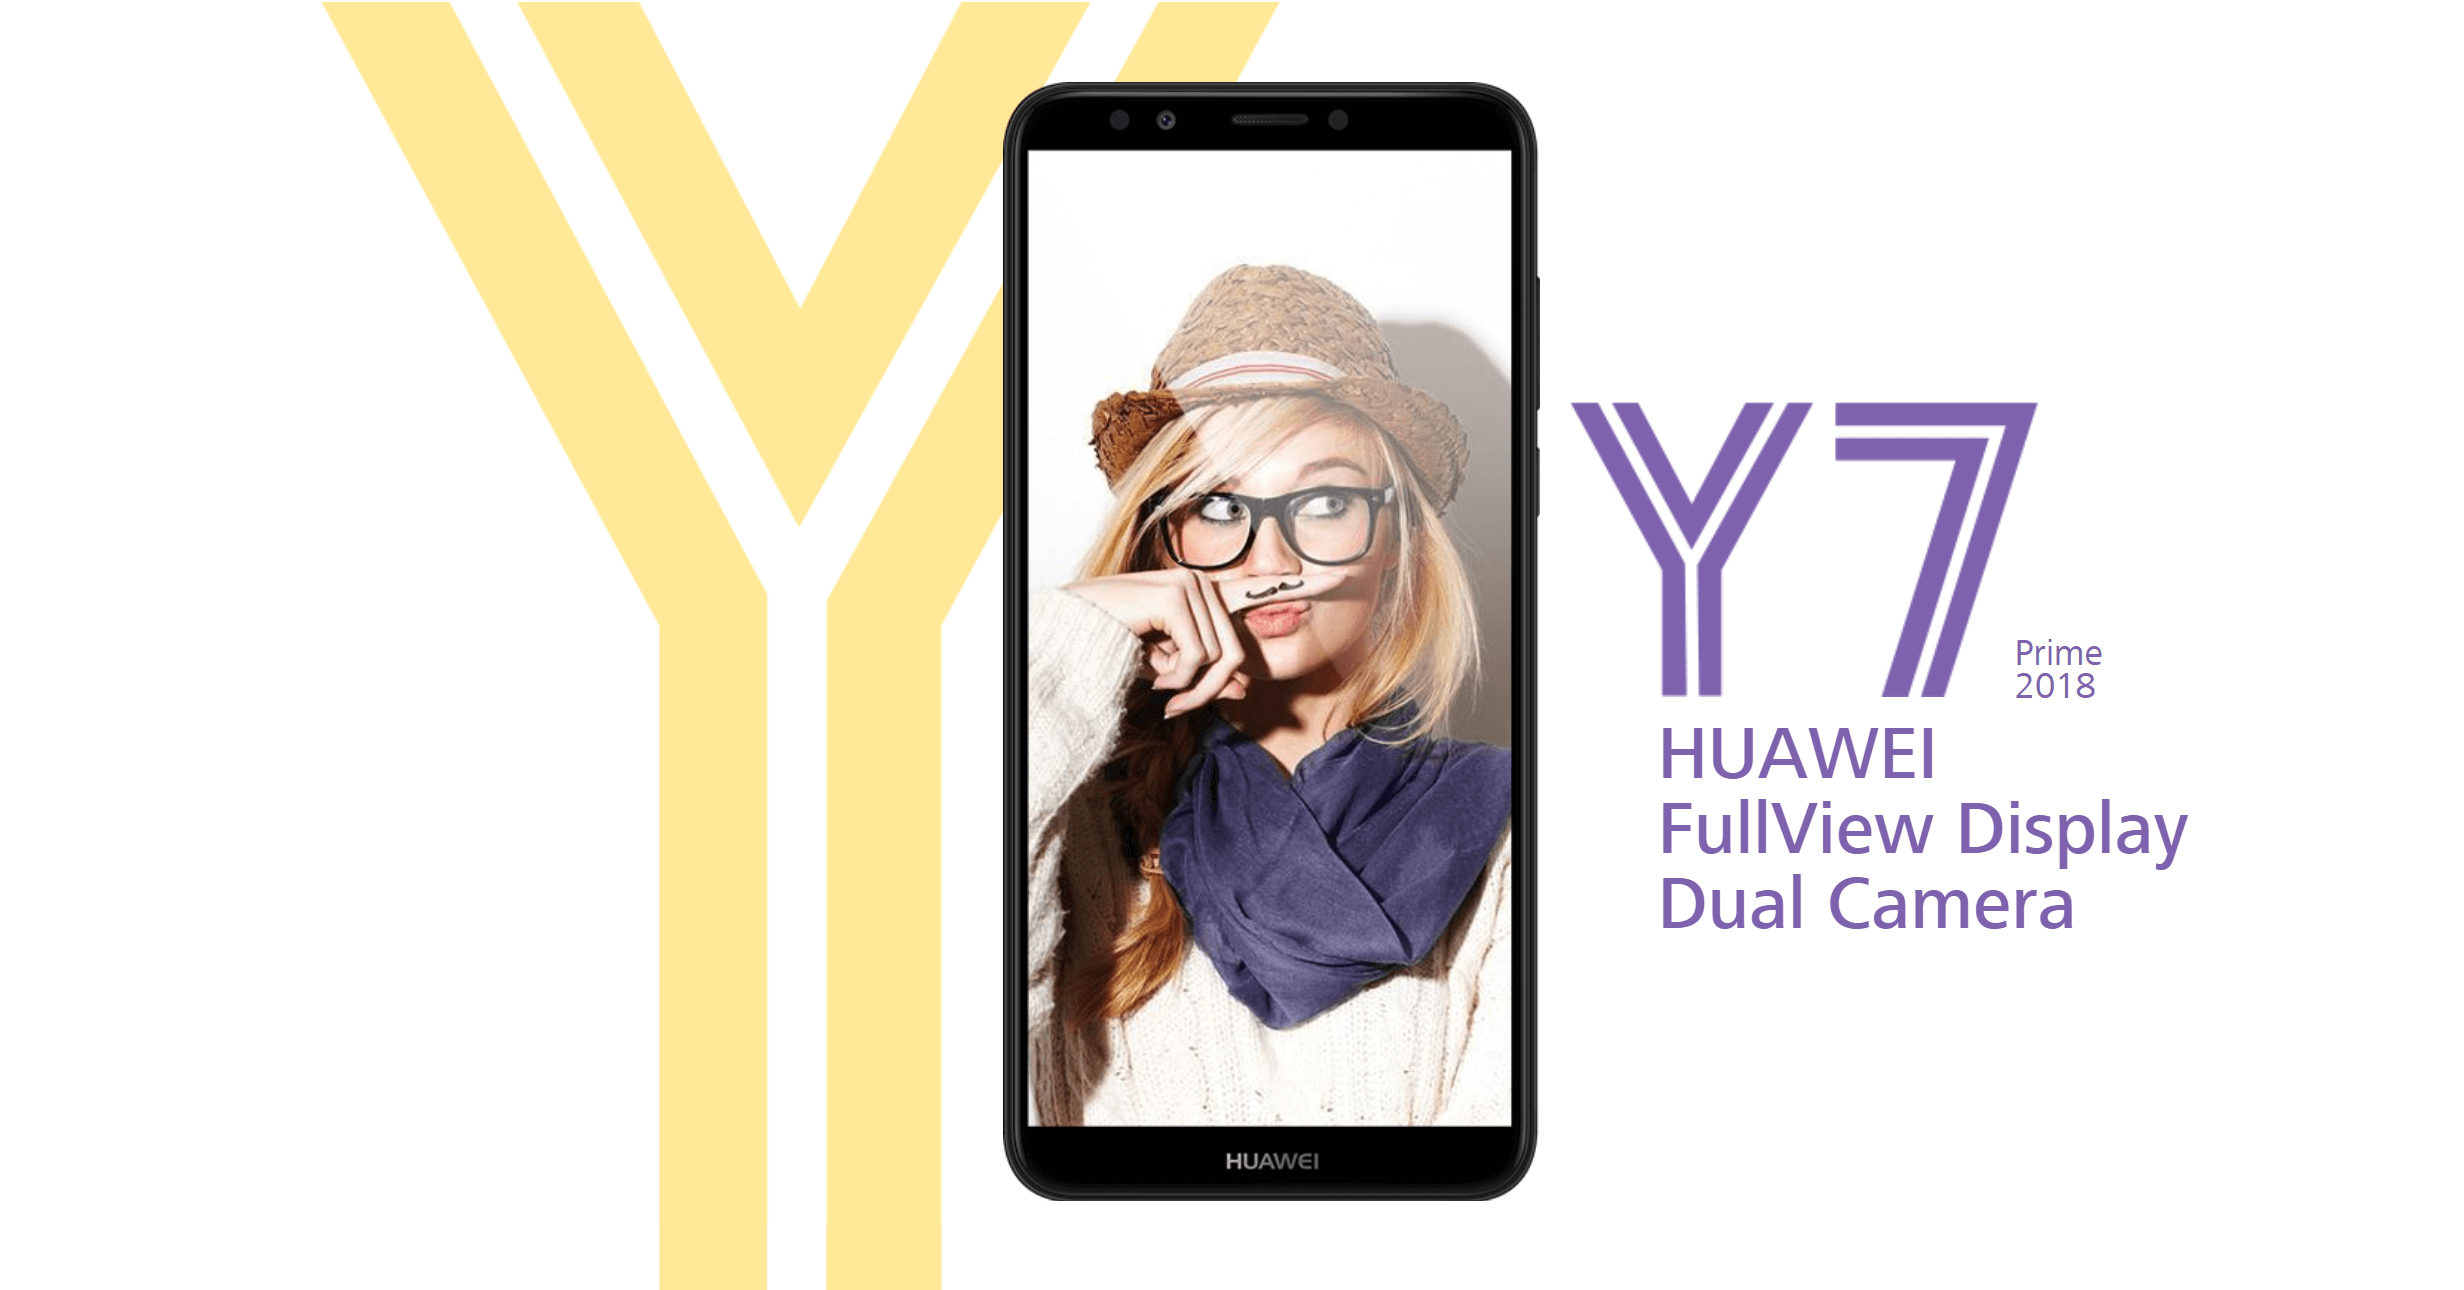 Huawei Y7 Prime 2018 launched